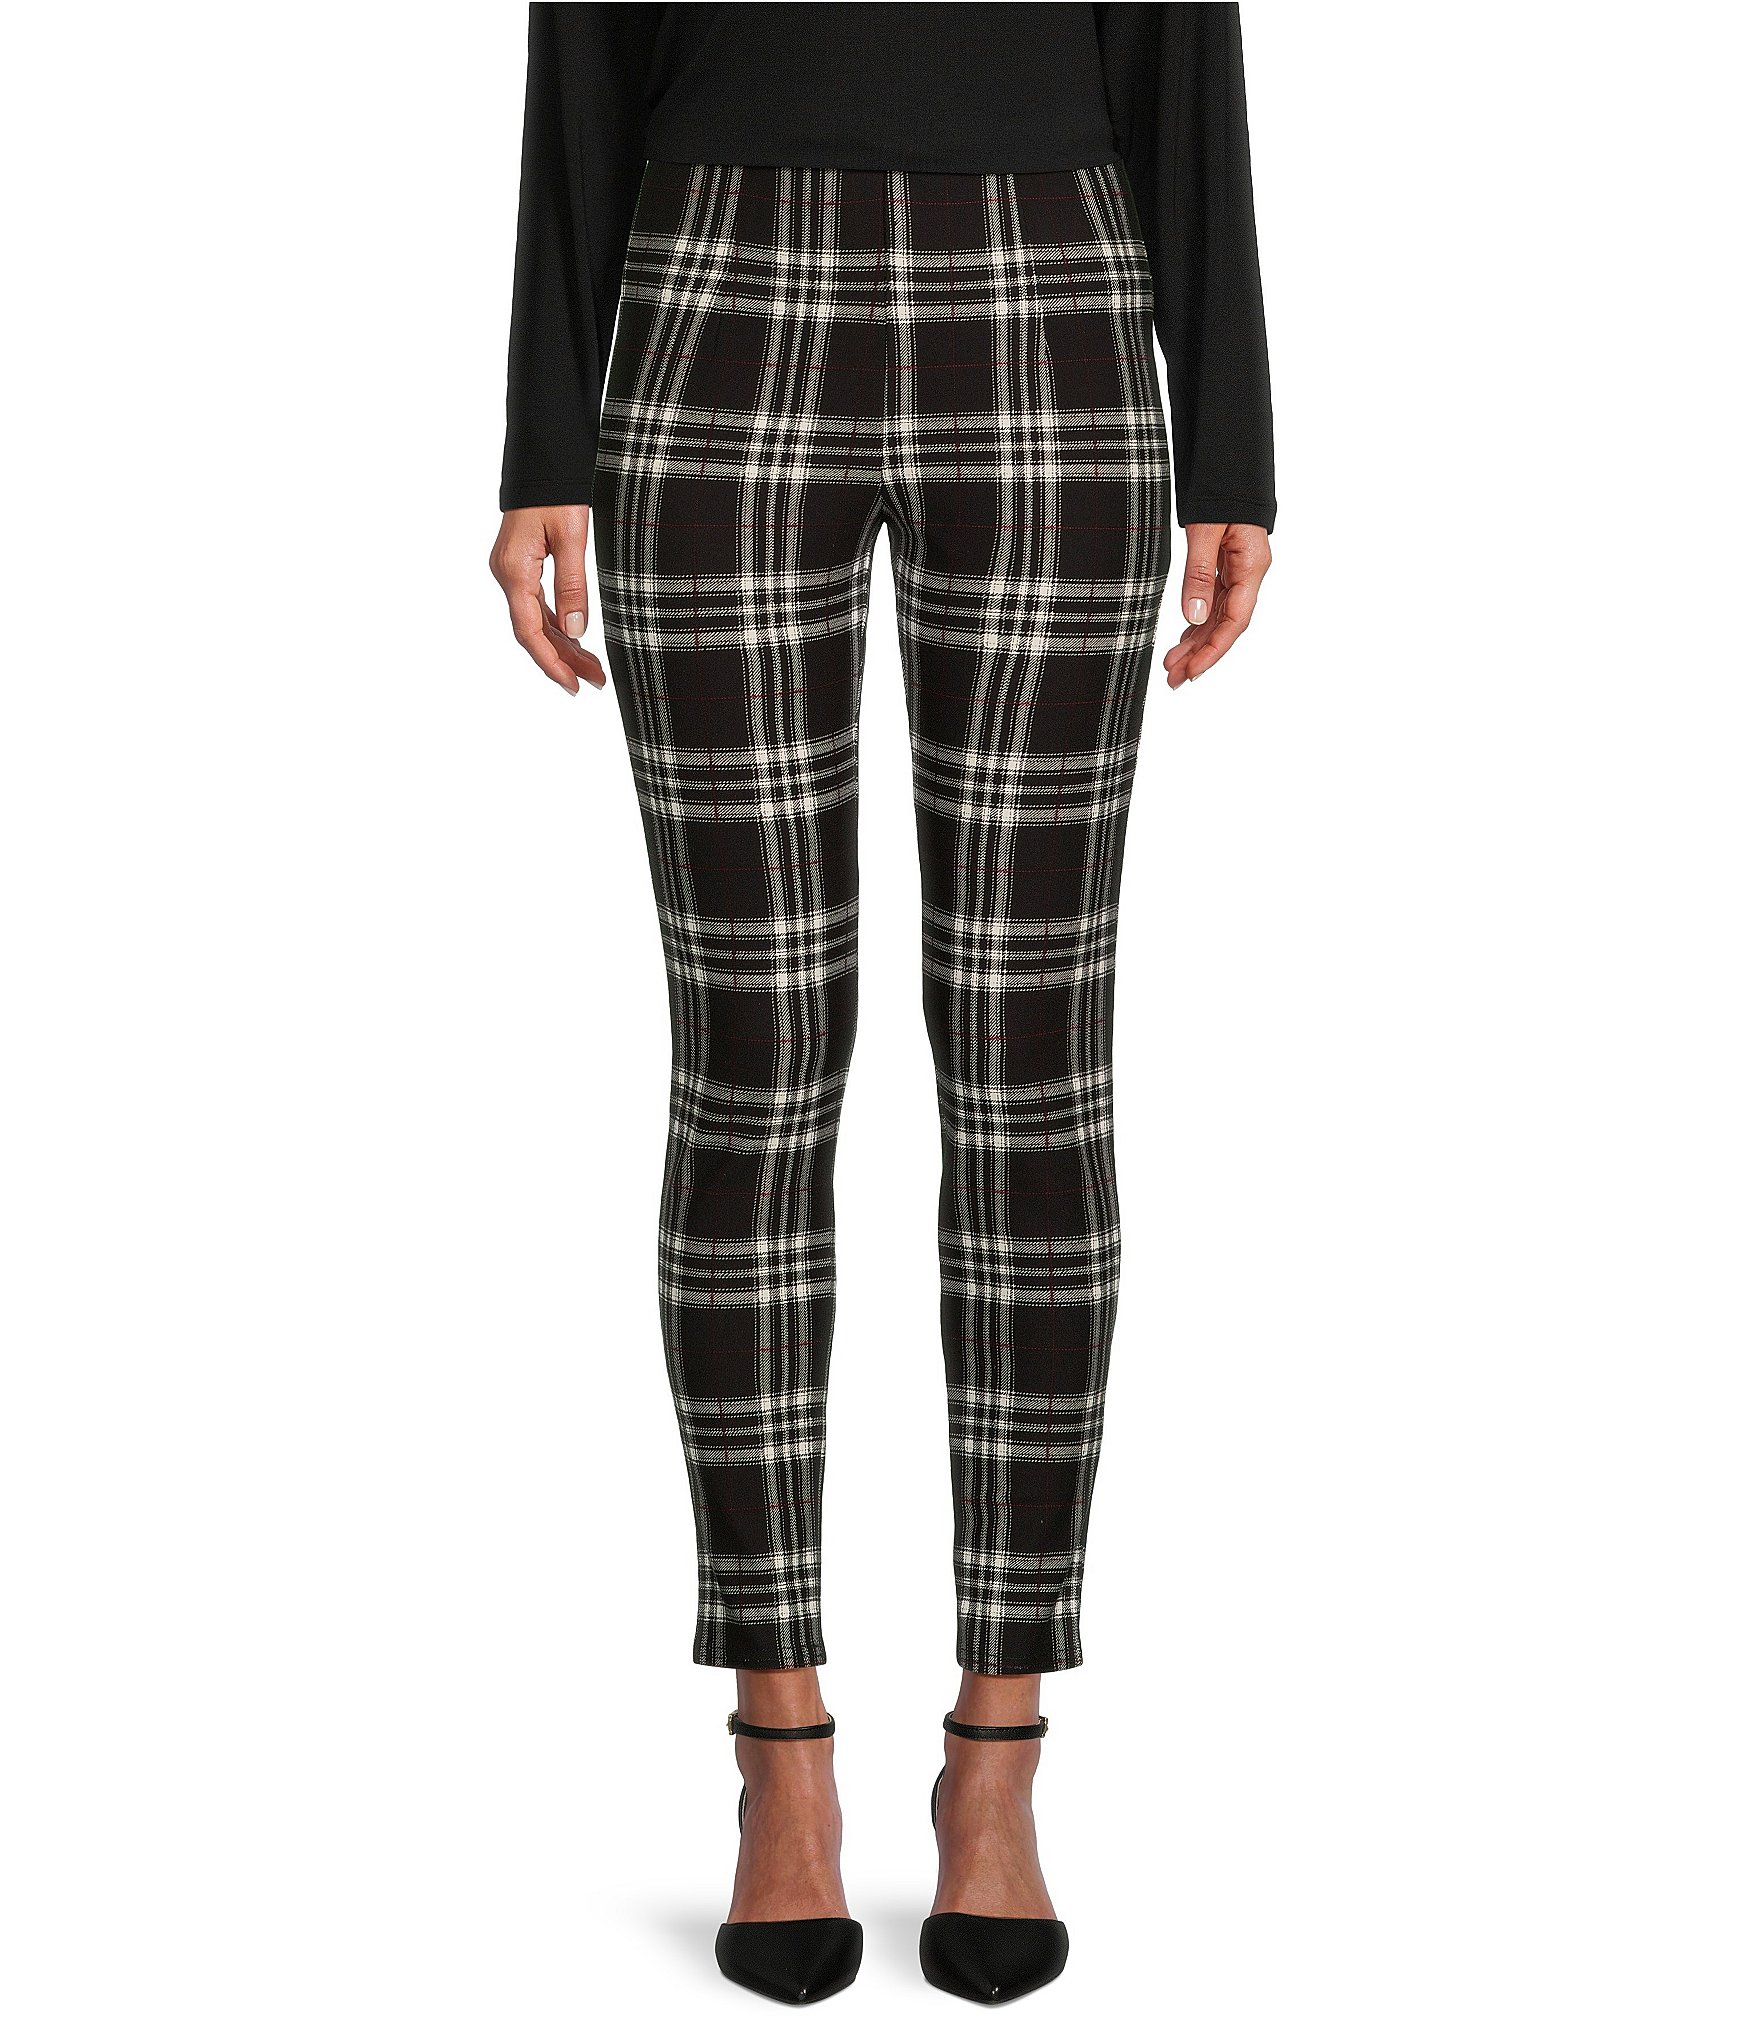 HMGYH satina high waisted leggings for women Plus Plaid Stacked Pants  (Color : Black and White, Size : L)